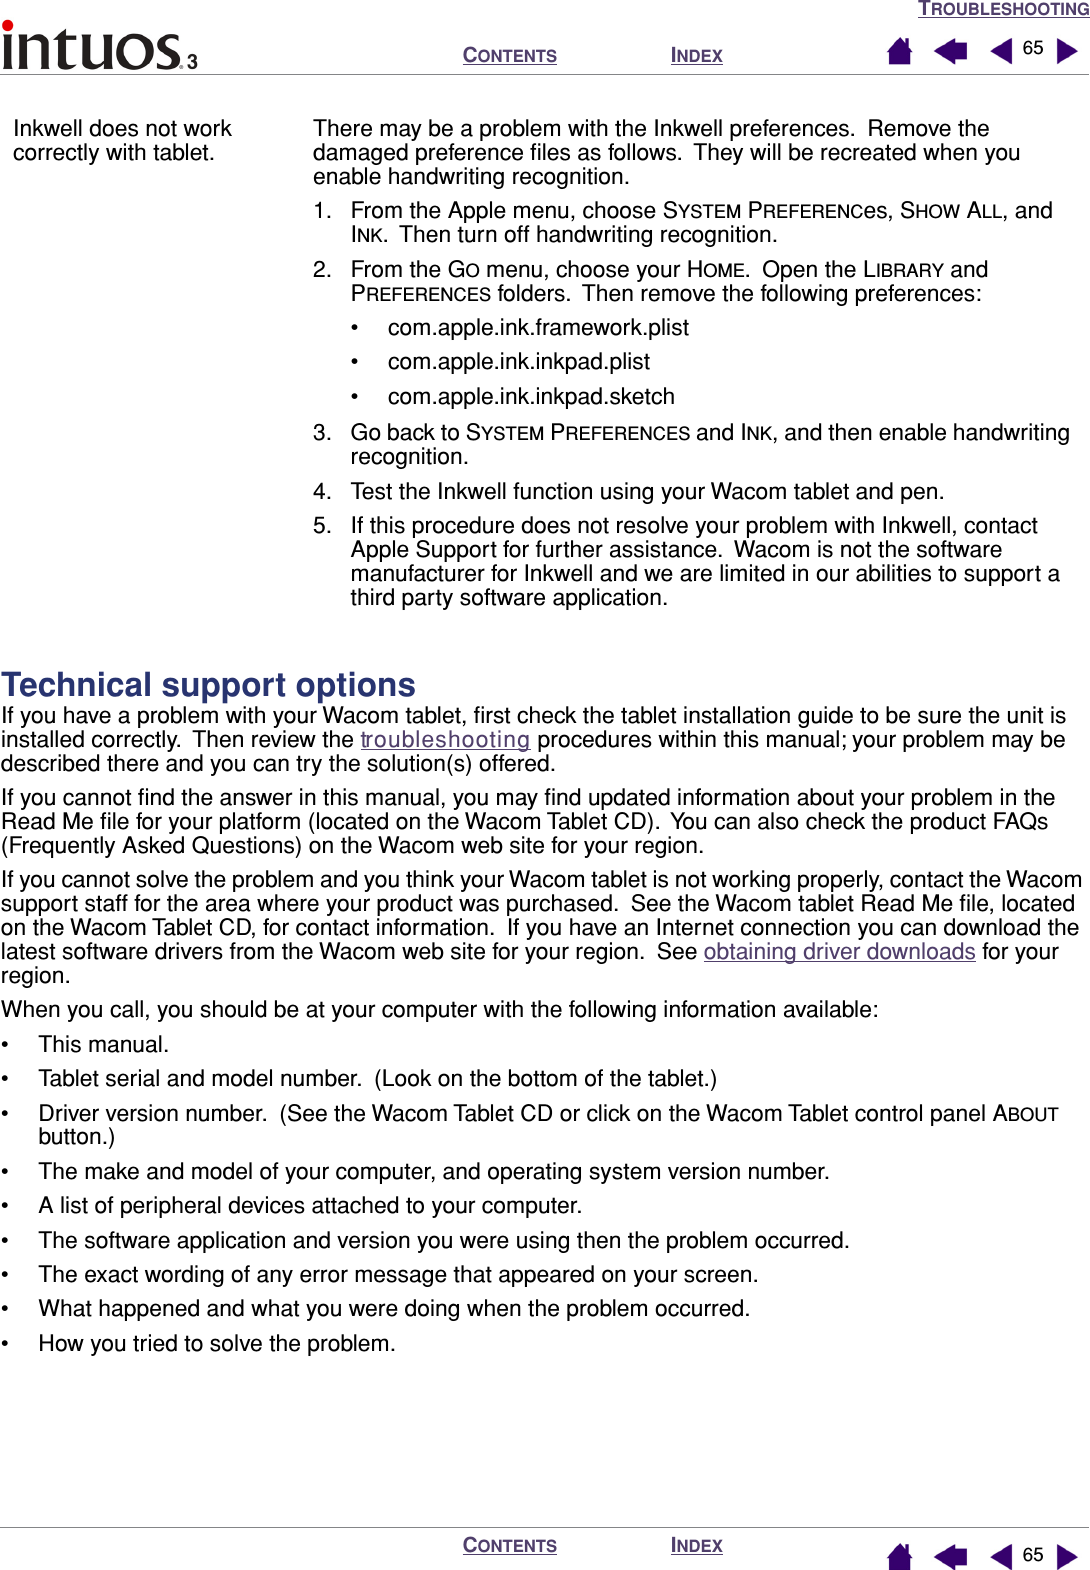 TROUBLESHOOTINGINDEXCONTENTSINDEXCONTENTS 6565Technical support optionsIf you have a problem with your Wacom tablet, ﬁrst check the tablet installation guide to be sure the unit is installed correctly.  Then review the troubleshooting procedures within this manual; your problem may be described there and you can try the solution(s) offered.If you cannot ﬁnd the answer in this manual, you may ﬁnd updated information about your problem in the Read Me ﬁle for your platform (located on the Wacom Tablet CD).  You can also check the product FAQs (Frequently Asked Questions) on the Wacom web site for your region.If you cannot solve the problem and you think your Wacom tablet is not working properly, contact the Wacom support staff for the area where your product was purchased.  See the Wacom tablet Read Me ﬁle, located on the Wacom Tablet CD, for contact information.  If you have an Internet connection you can download the latest software drivers from the Wacom web site for your region.  See obtaining driver downloads for your region.When you call, you should be at your computer with the following information available:• This manual.• Tablet serial and model number.  (Look on the bottom of the tablet.)• Driver version number.  (See the Wacom Tablet CD or click on the Wacom Tablet control panel ABOUT button.)• The make and model of your computer, and operating system version number.• A list of peripheral devices attached to your computer.• The software application and version you were using then the problem occurred.• The exact wording of any error message that appeared on your screen.• What happened and what you were doing when the problem occurred.• How you tried to solve the problem.Inkwell does not work correctly with tablet.There may be a problem with the Inkwell preferences.  Remove the damaged preference ﬁles as follows.  They will be recreated when you enable handwriting recognition.1. From the Apple menu, choose SYSTEM PREFERENCes, SHOW ALL, and INK.  Then turn off handwriting recognition.2. From the GO menu, choose your HOME.  Open the LIBRARY and PREFERENCES folders.  Then remove the following preferences:• com.apple.ink.framework.plist• com.apple.ink.inkpad.plist• com.apple.ink.inkpad.sketch3. Go back to SYSTEM PREFERENCES and INK, and then enable handwriting recognition.4. Test the Inkwell function using your Wacom tablet and pen.5. If this procedure does not resolve your problem with Inkwell, contact Apple Support for further assistance.  Wacom is not the software manufacturer for Inkwell and we are limited in our abilities to support a third party software application.